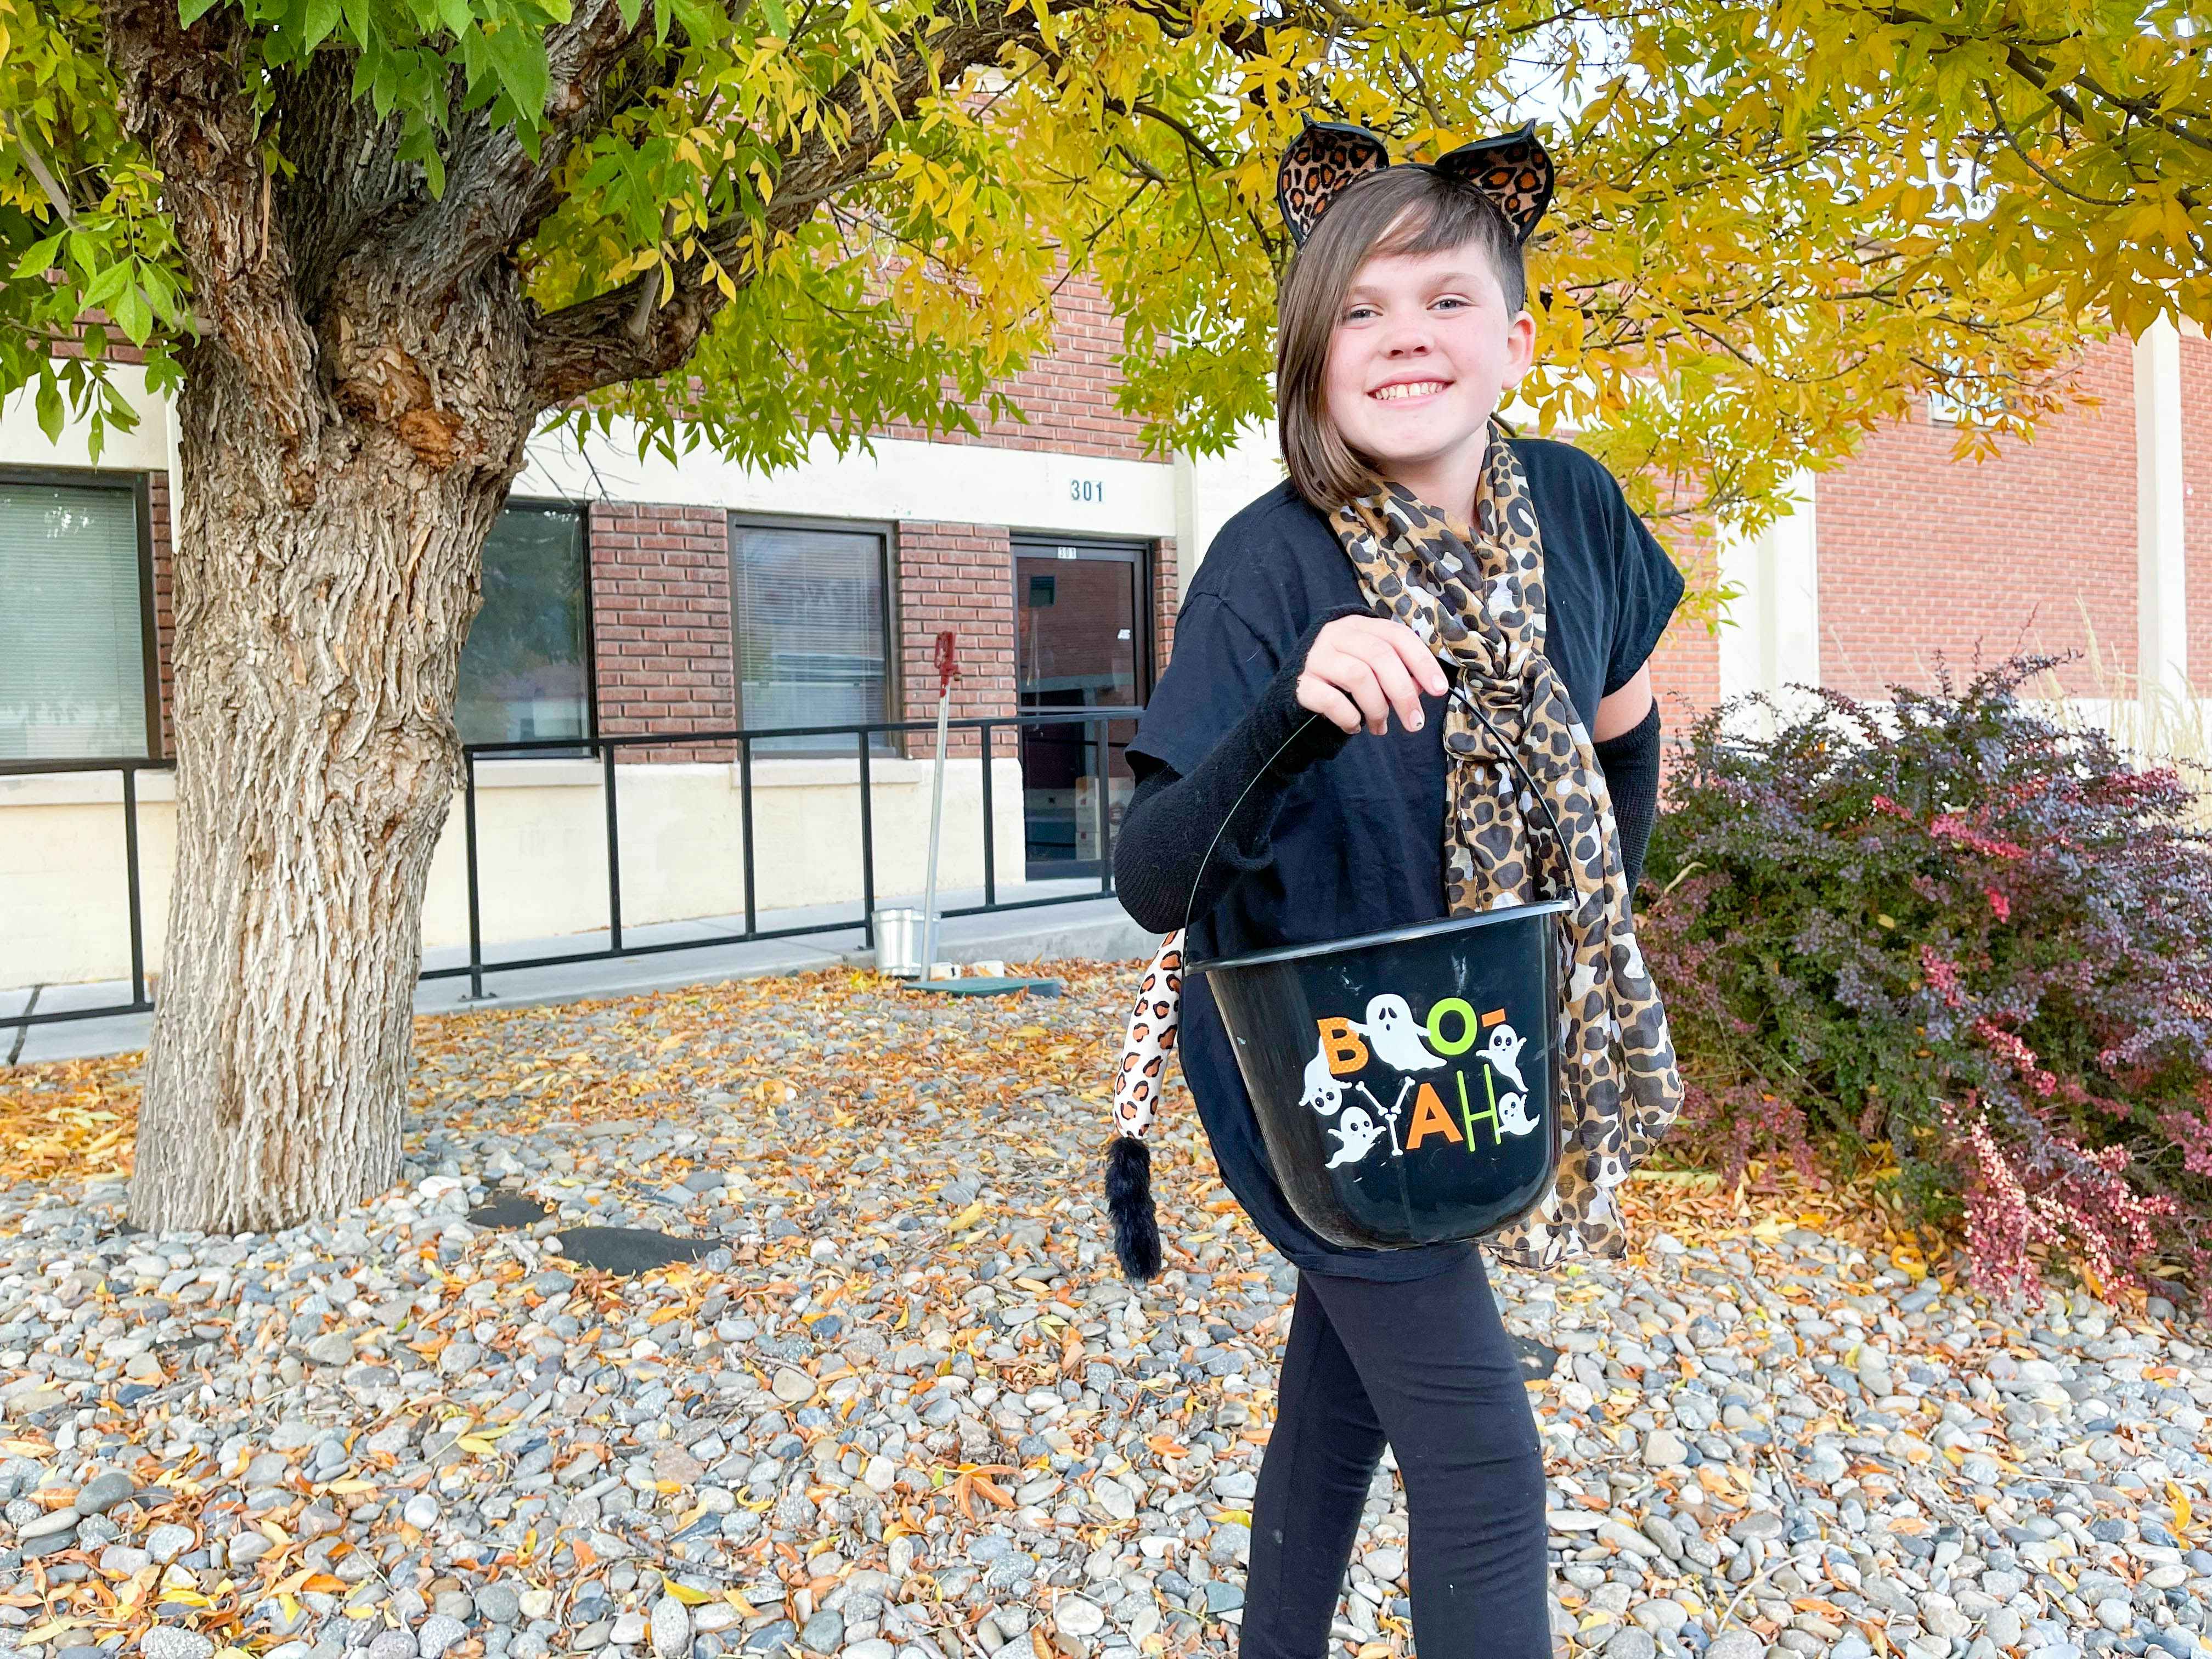 A child dressed up as a cat holding a trick-or-treating pail.